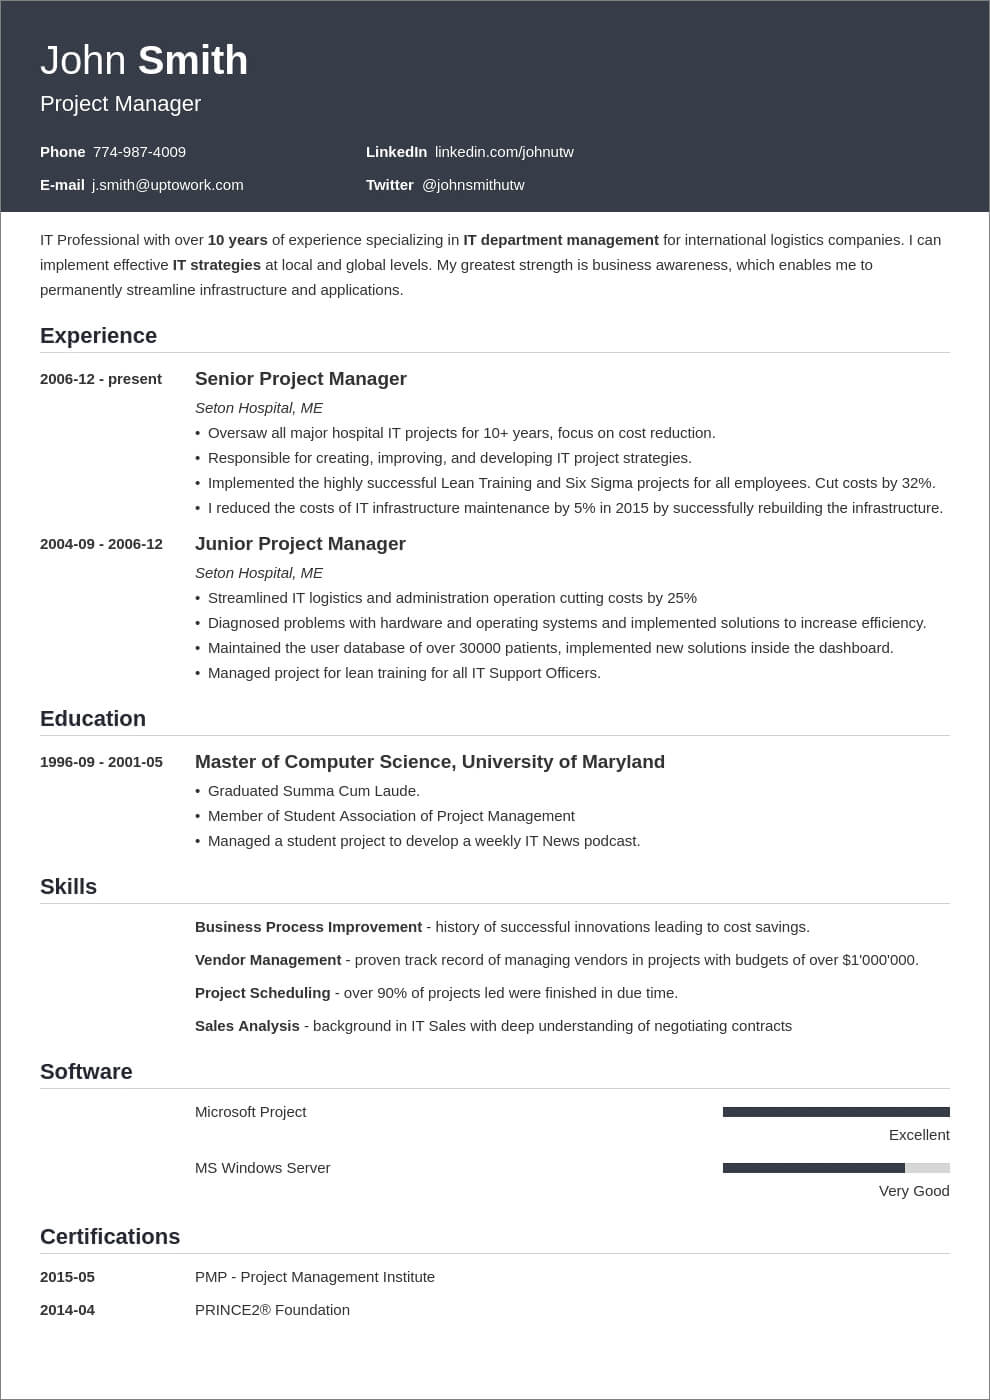 What Makes resume That Different